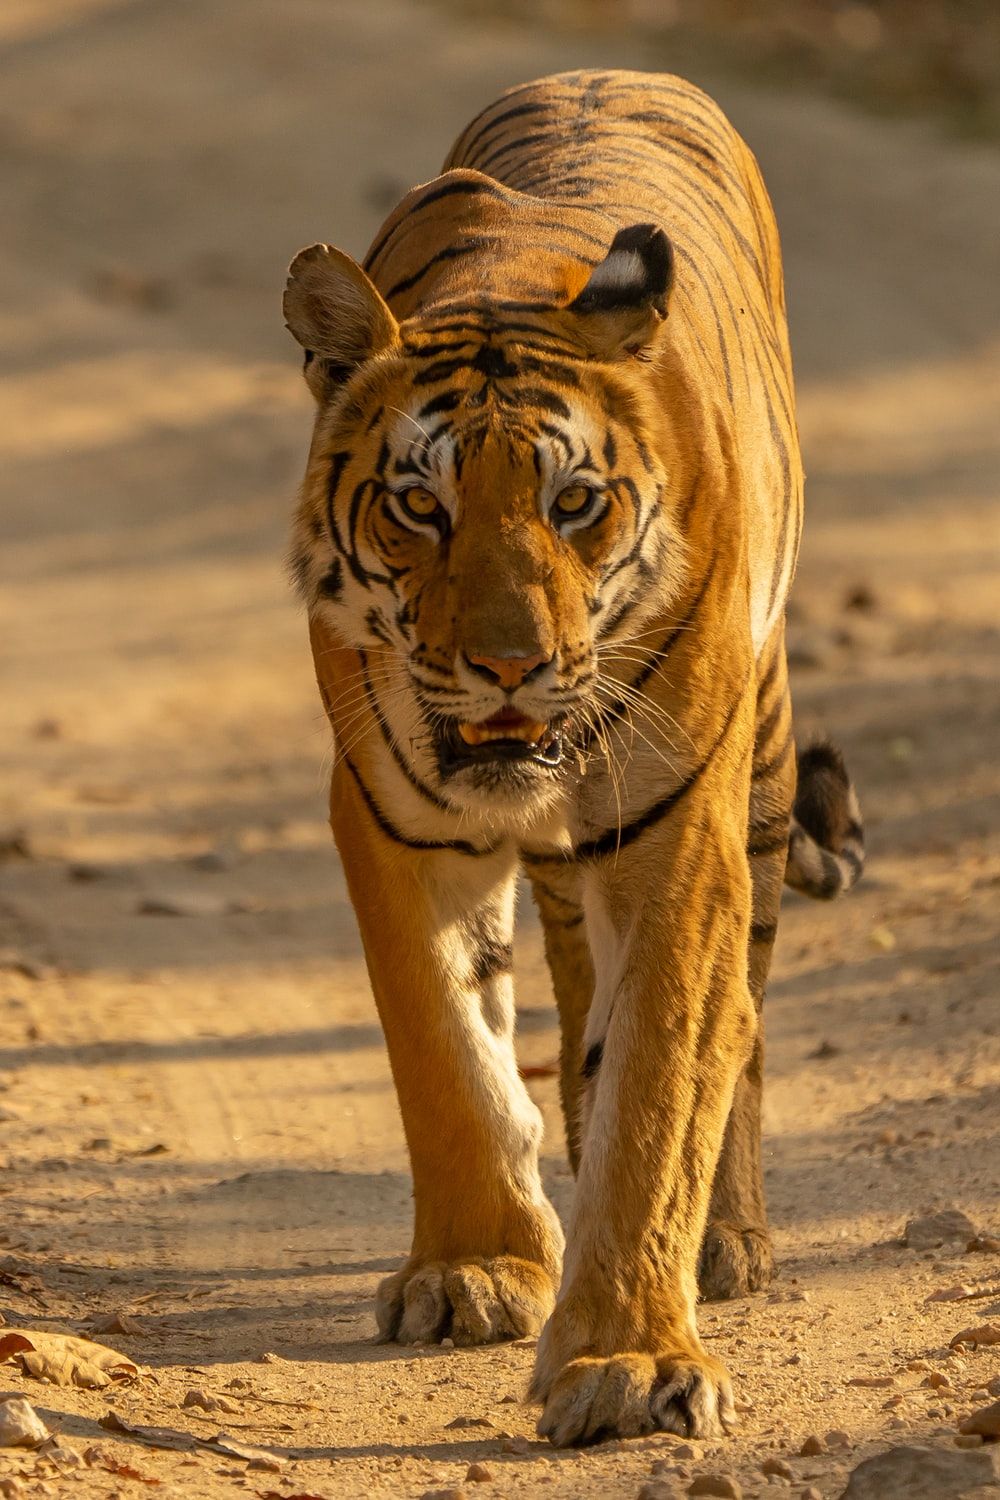 Tiger Picture. Download Free Image .com